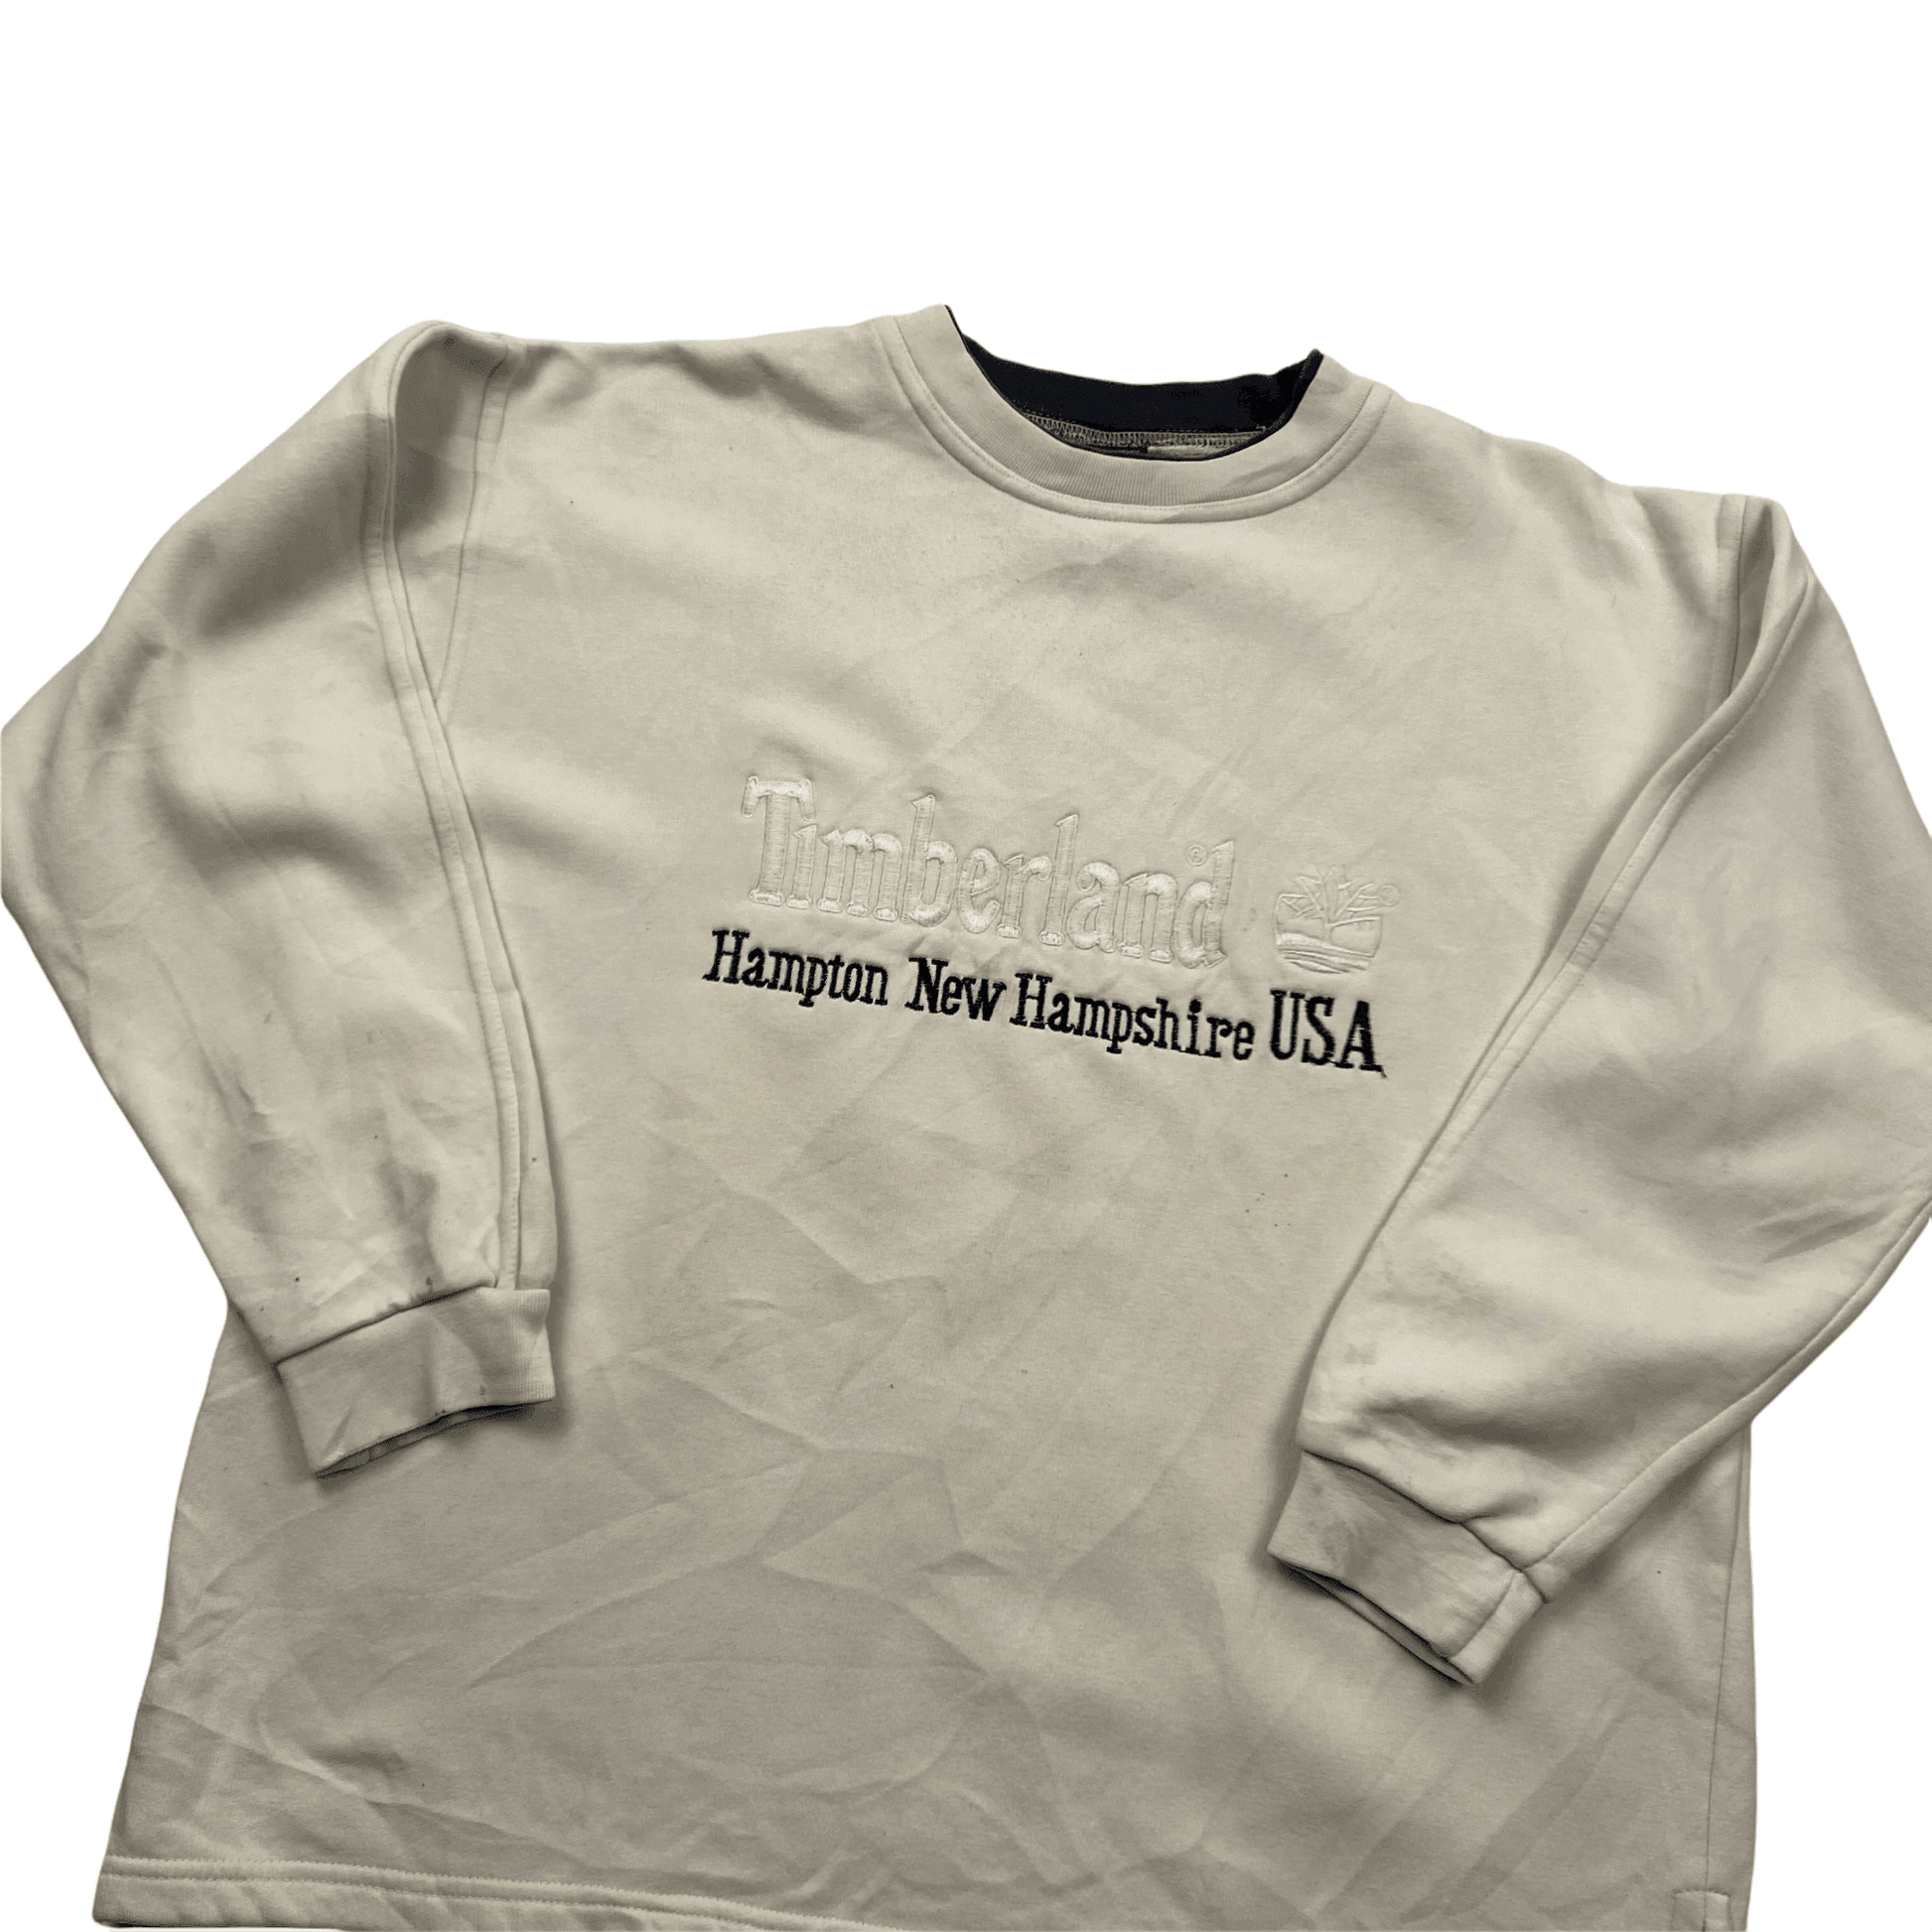 Vintage 90s Cream Timberland Spell-Out Sweatshirt - Small - The Streetwear Studio